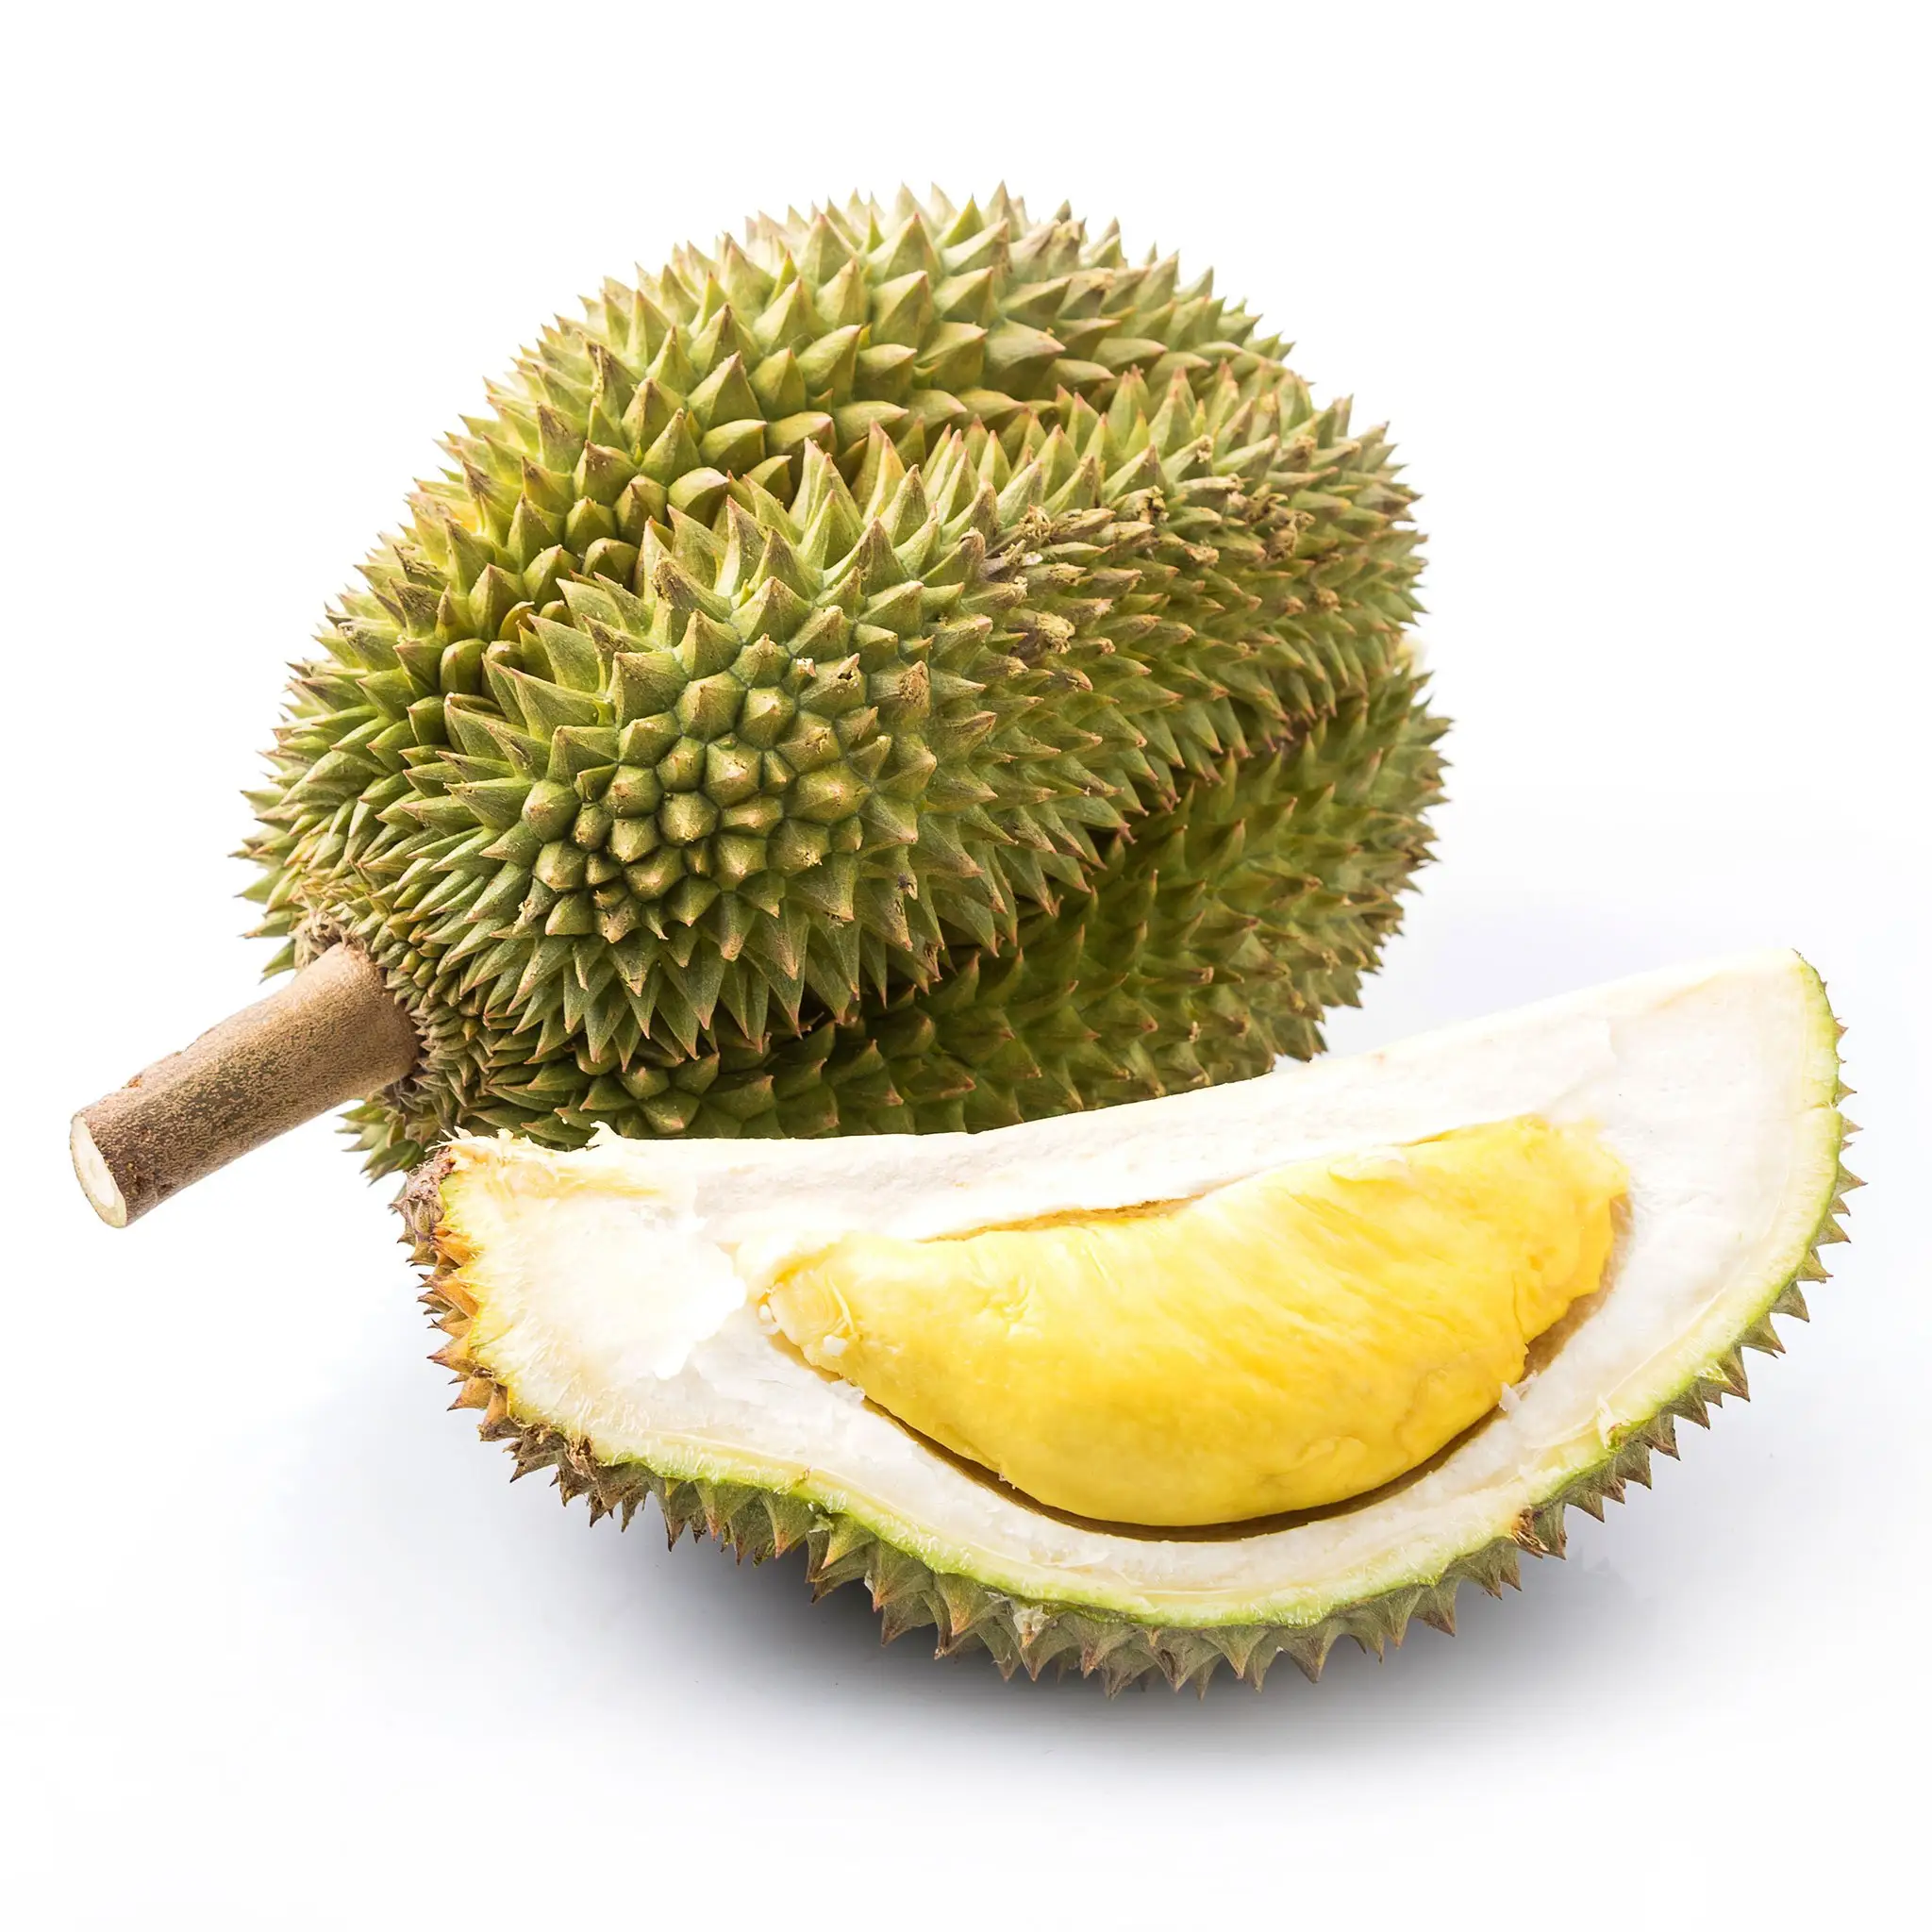 Vietnam Fresh durian for exporting with high quality, packaged carefully and the best price shipping to EU, US, ASIA market